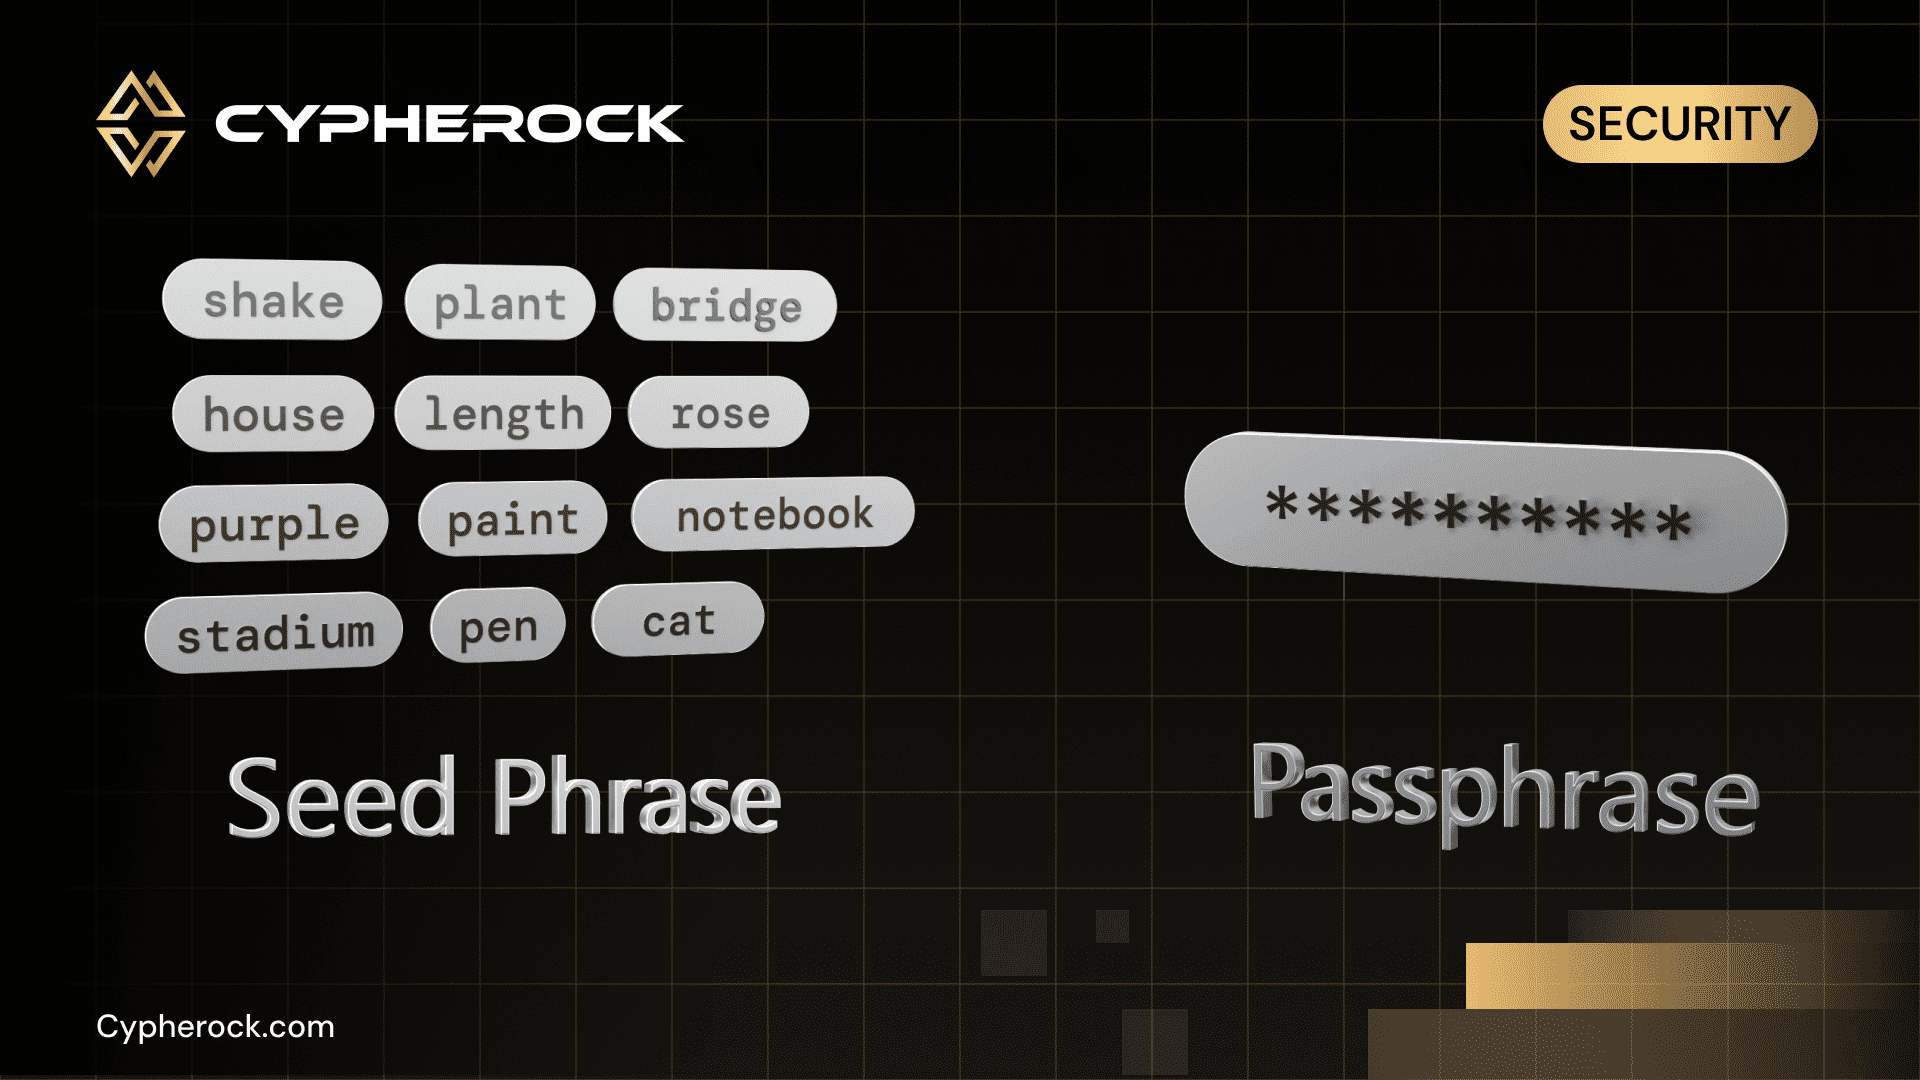 Difference between a seed phrase and a passphrase?